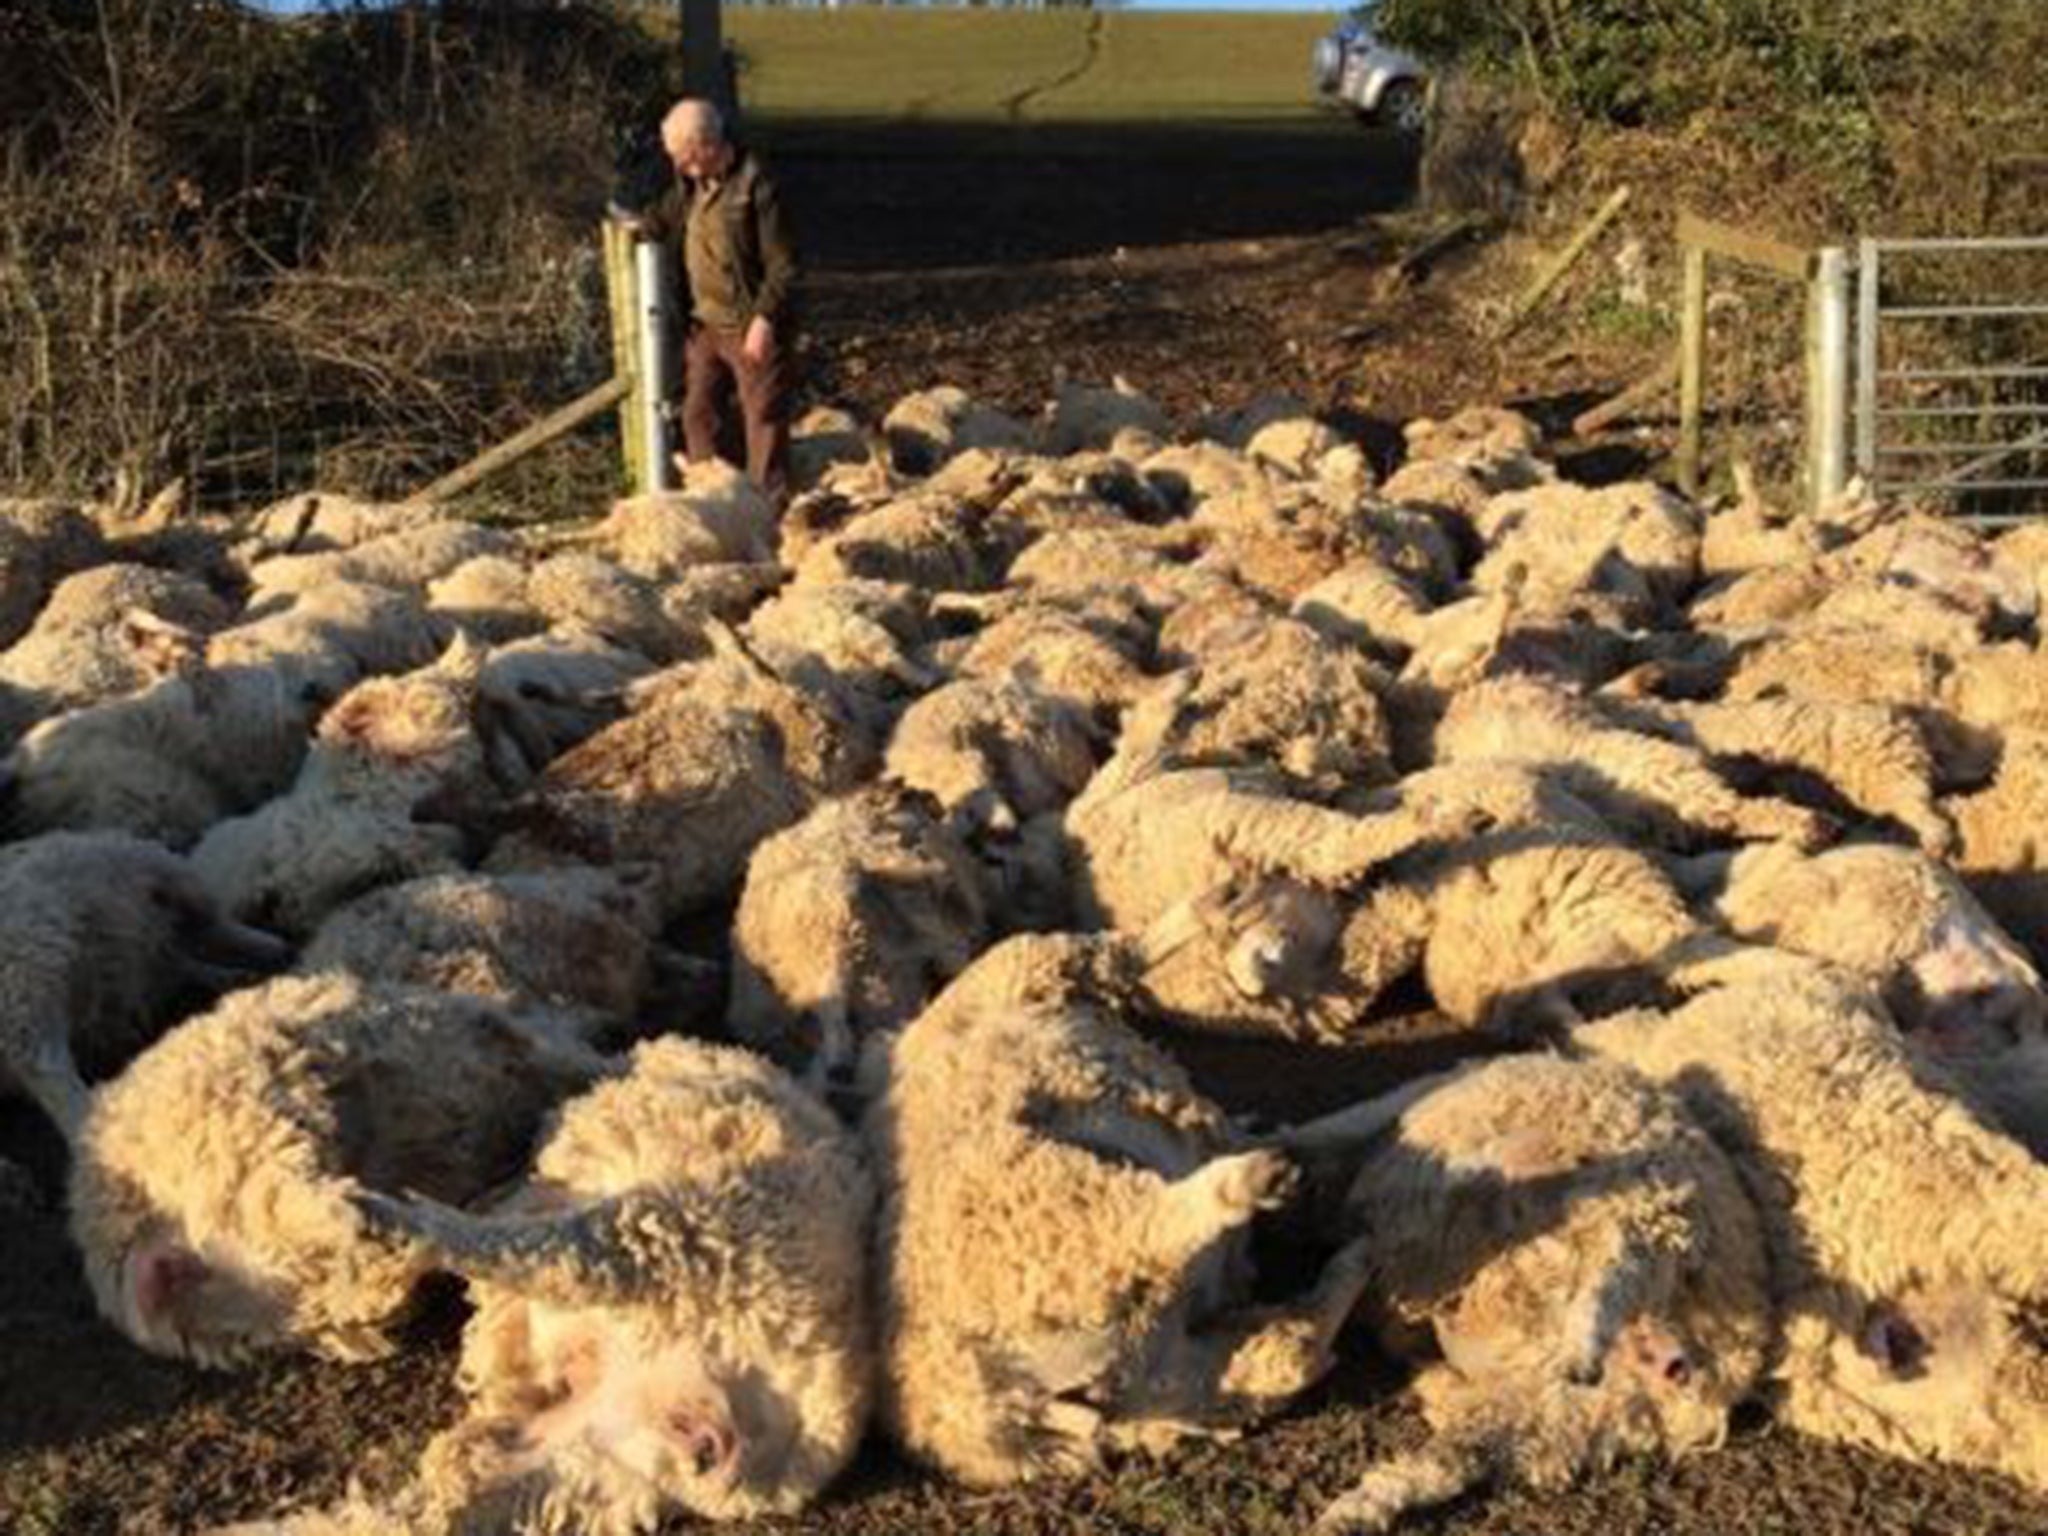 The aftermath of a suspected sheep worrying in West Sussex